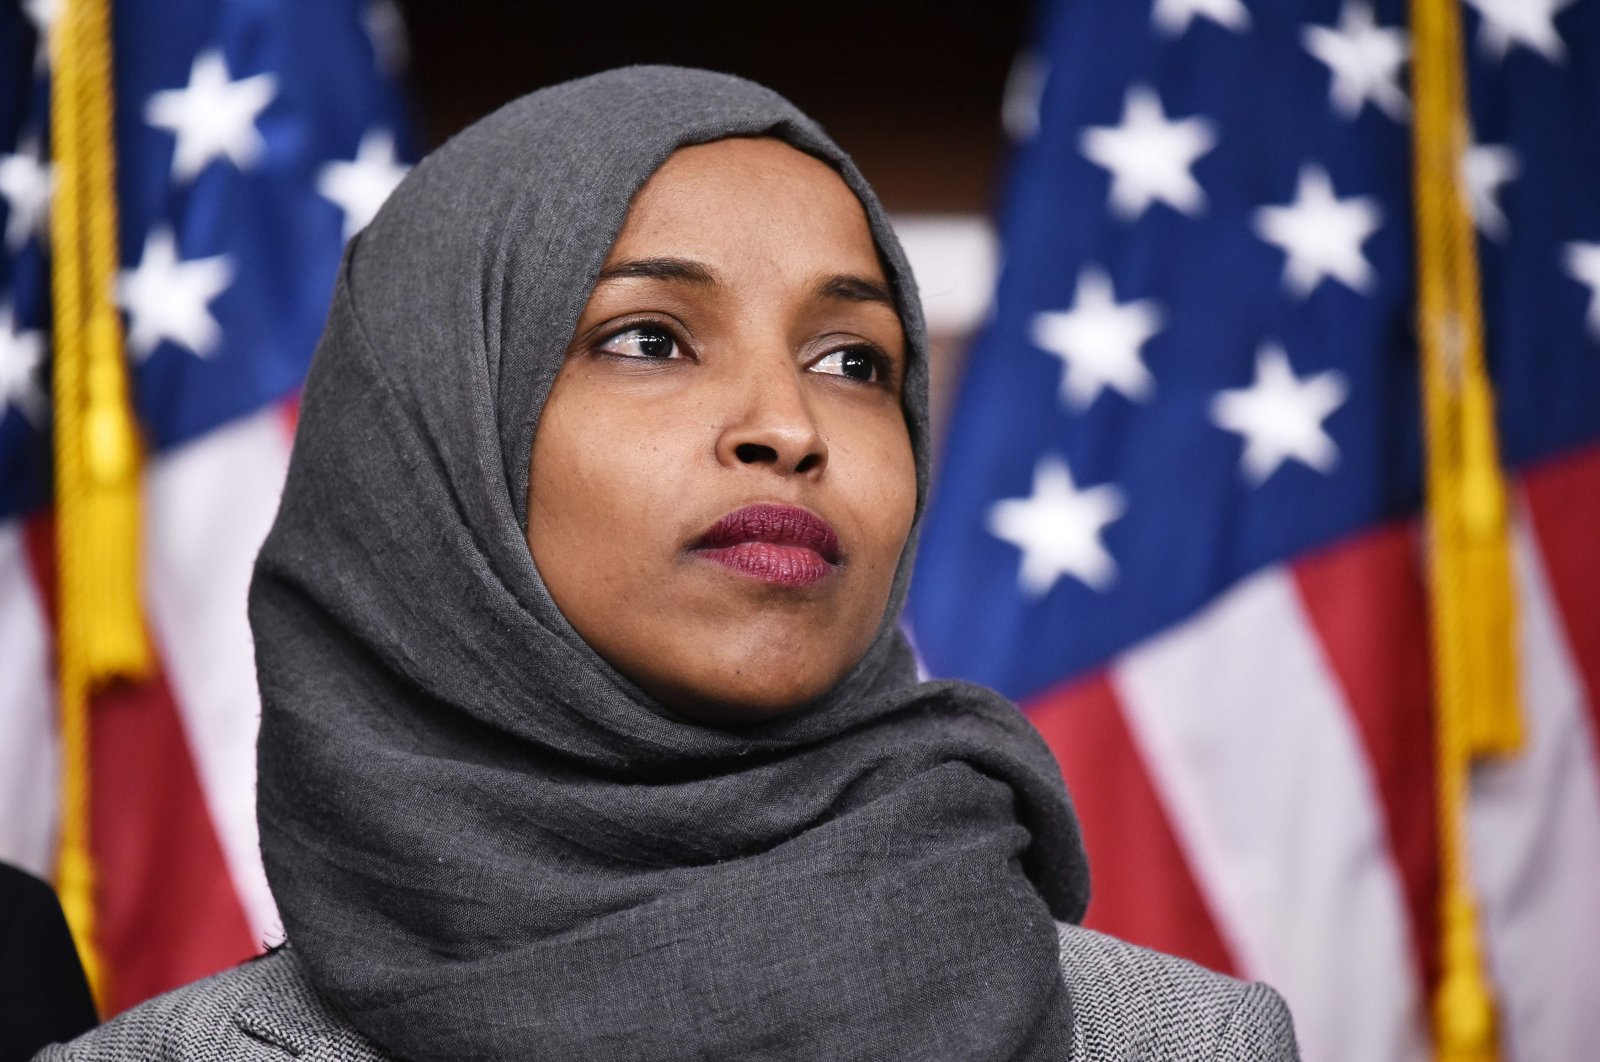 Ilhan Omar attends a press conference in the House Visitors Center at the U.S. Capitol, Washington, D.C., Nov. 30, 2018. (AFP Photo)